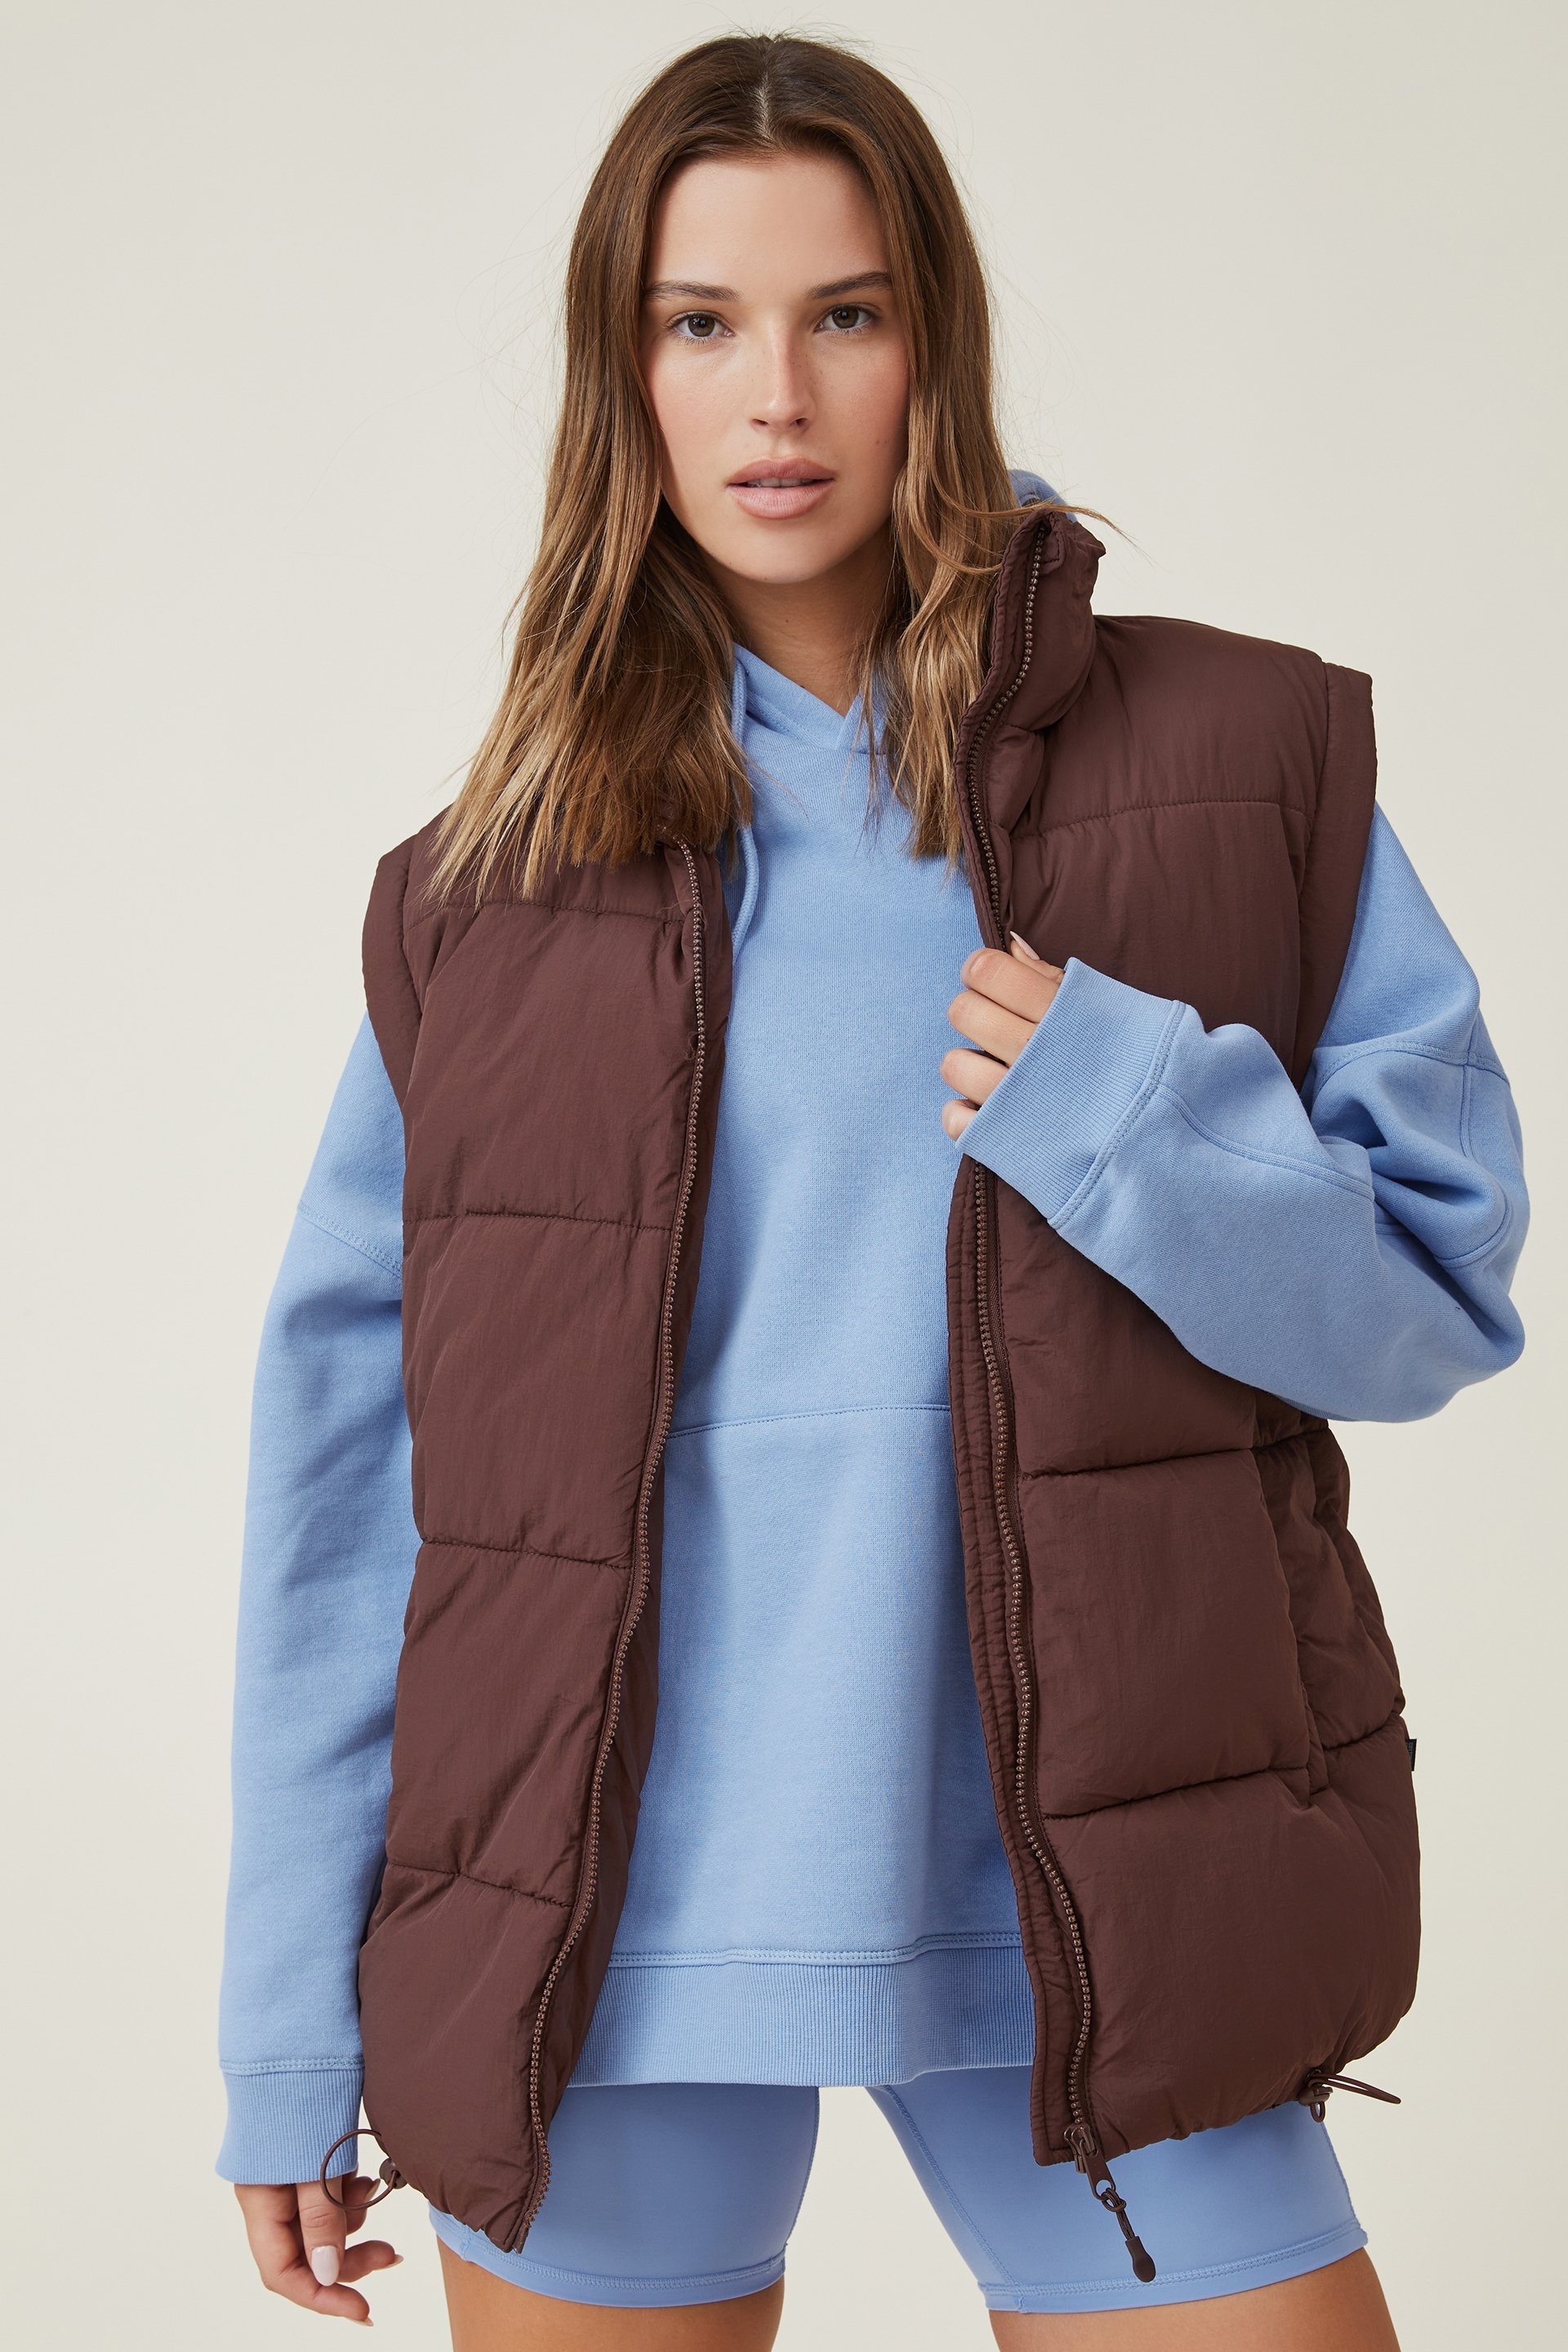 Body - The Recycled Mother Puffer Vest - Cedar brown